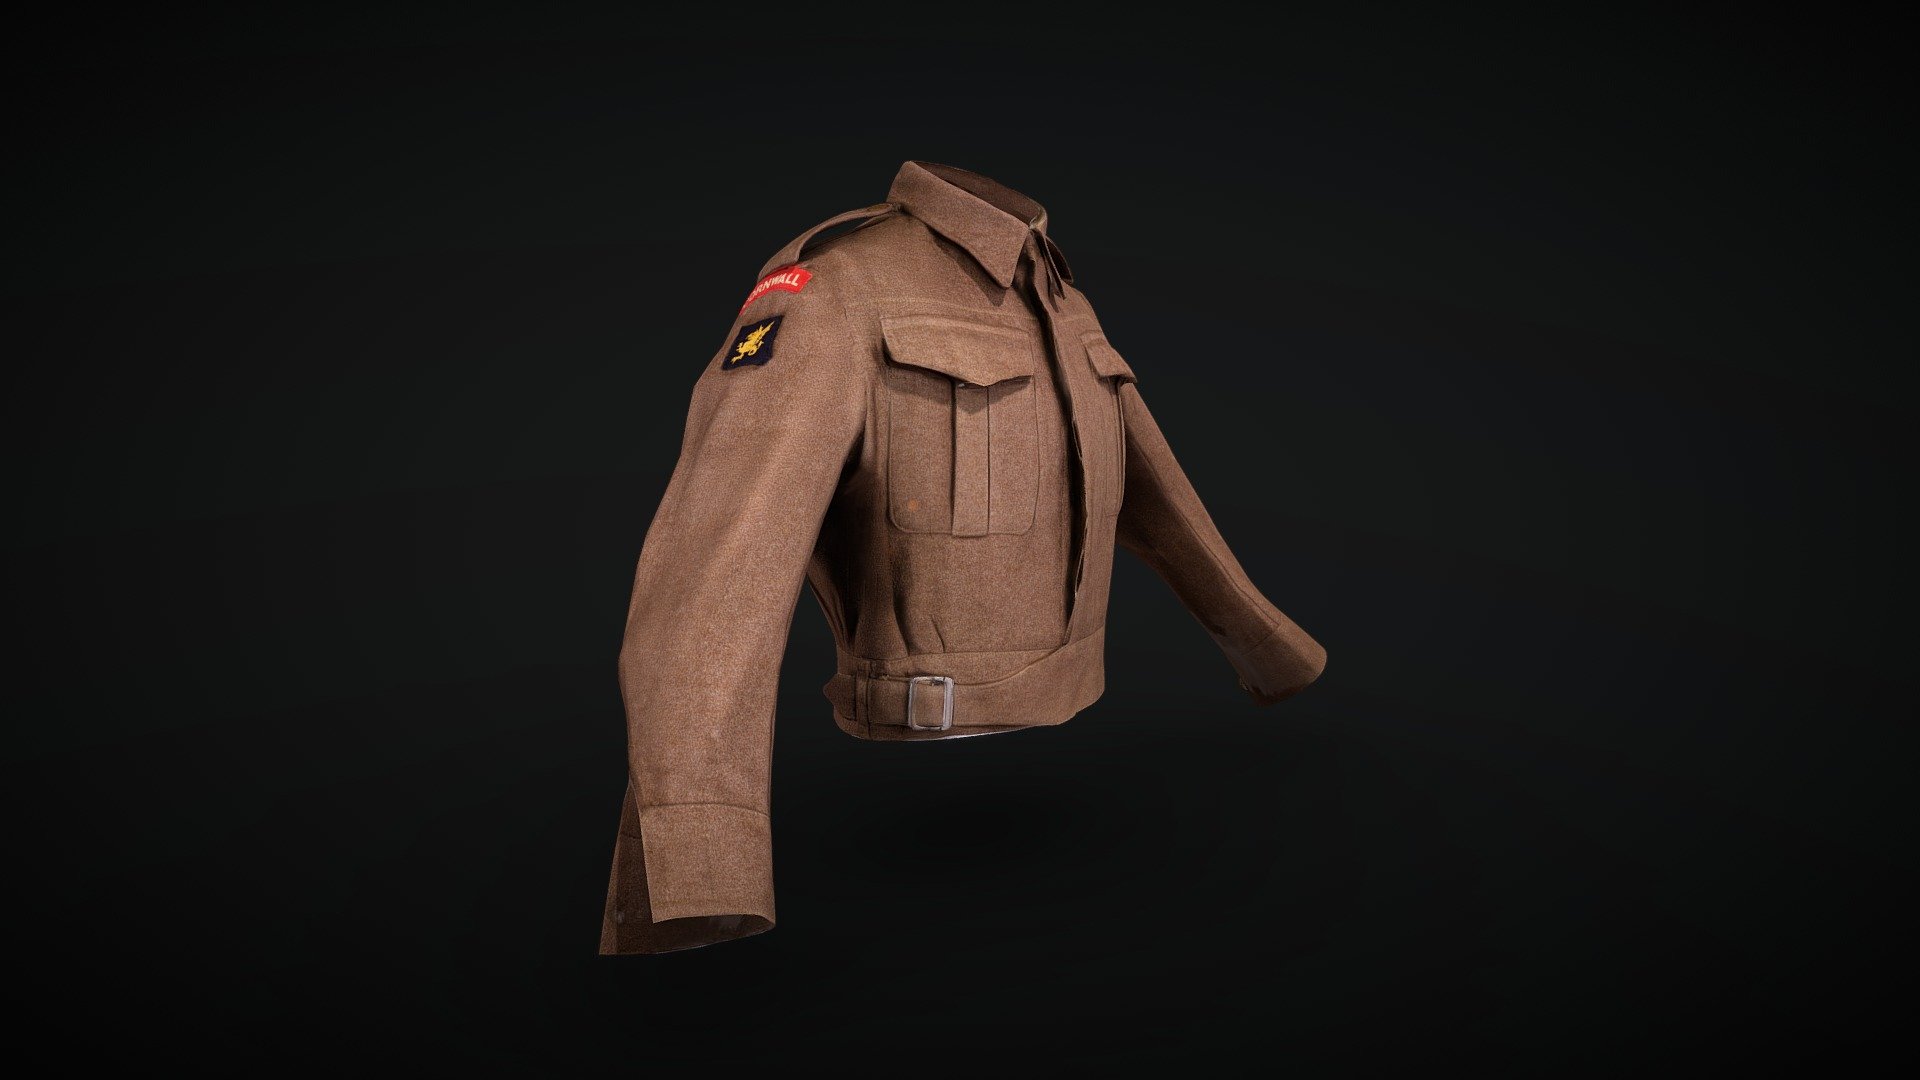 1942 khaki battle dress blouse. This new style of jacket was developed for better manouverabillity with the increased introduction of motorised vehicles to the military. There are 2 hook and eye fastenings on the collar of the jacket with 5 metal buttons running down the right-hand side of the jacket. There are 2 pockets on either breast fastened with a plain button. On the top of either sleeve is a Cornwall badge in red, and directly brlow is a blue patch with a yellow dragon detailing. There is a slight spot of discoloration on the bottom of the breast pocket on the right- this almost looks like some sort of bleach stain. Inside the jacket is a label that reads “Battledress Blouses, Serge. Size no 6.” And the date stamp is June 1942.

This item originates from the collection at Bodmin Keep Musuem, Cornwall, UK. The model was created by Purpose3D. If you are interested in purchasing the model, please get in touch with Purpose 3D 3d model